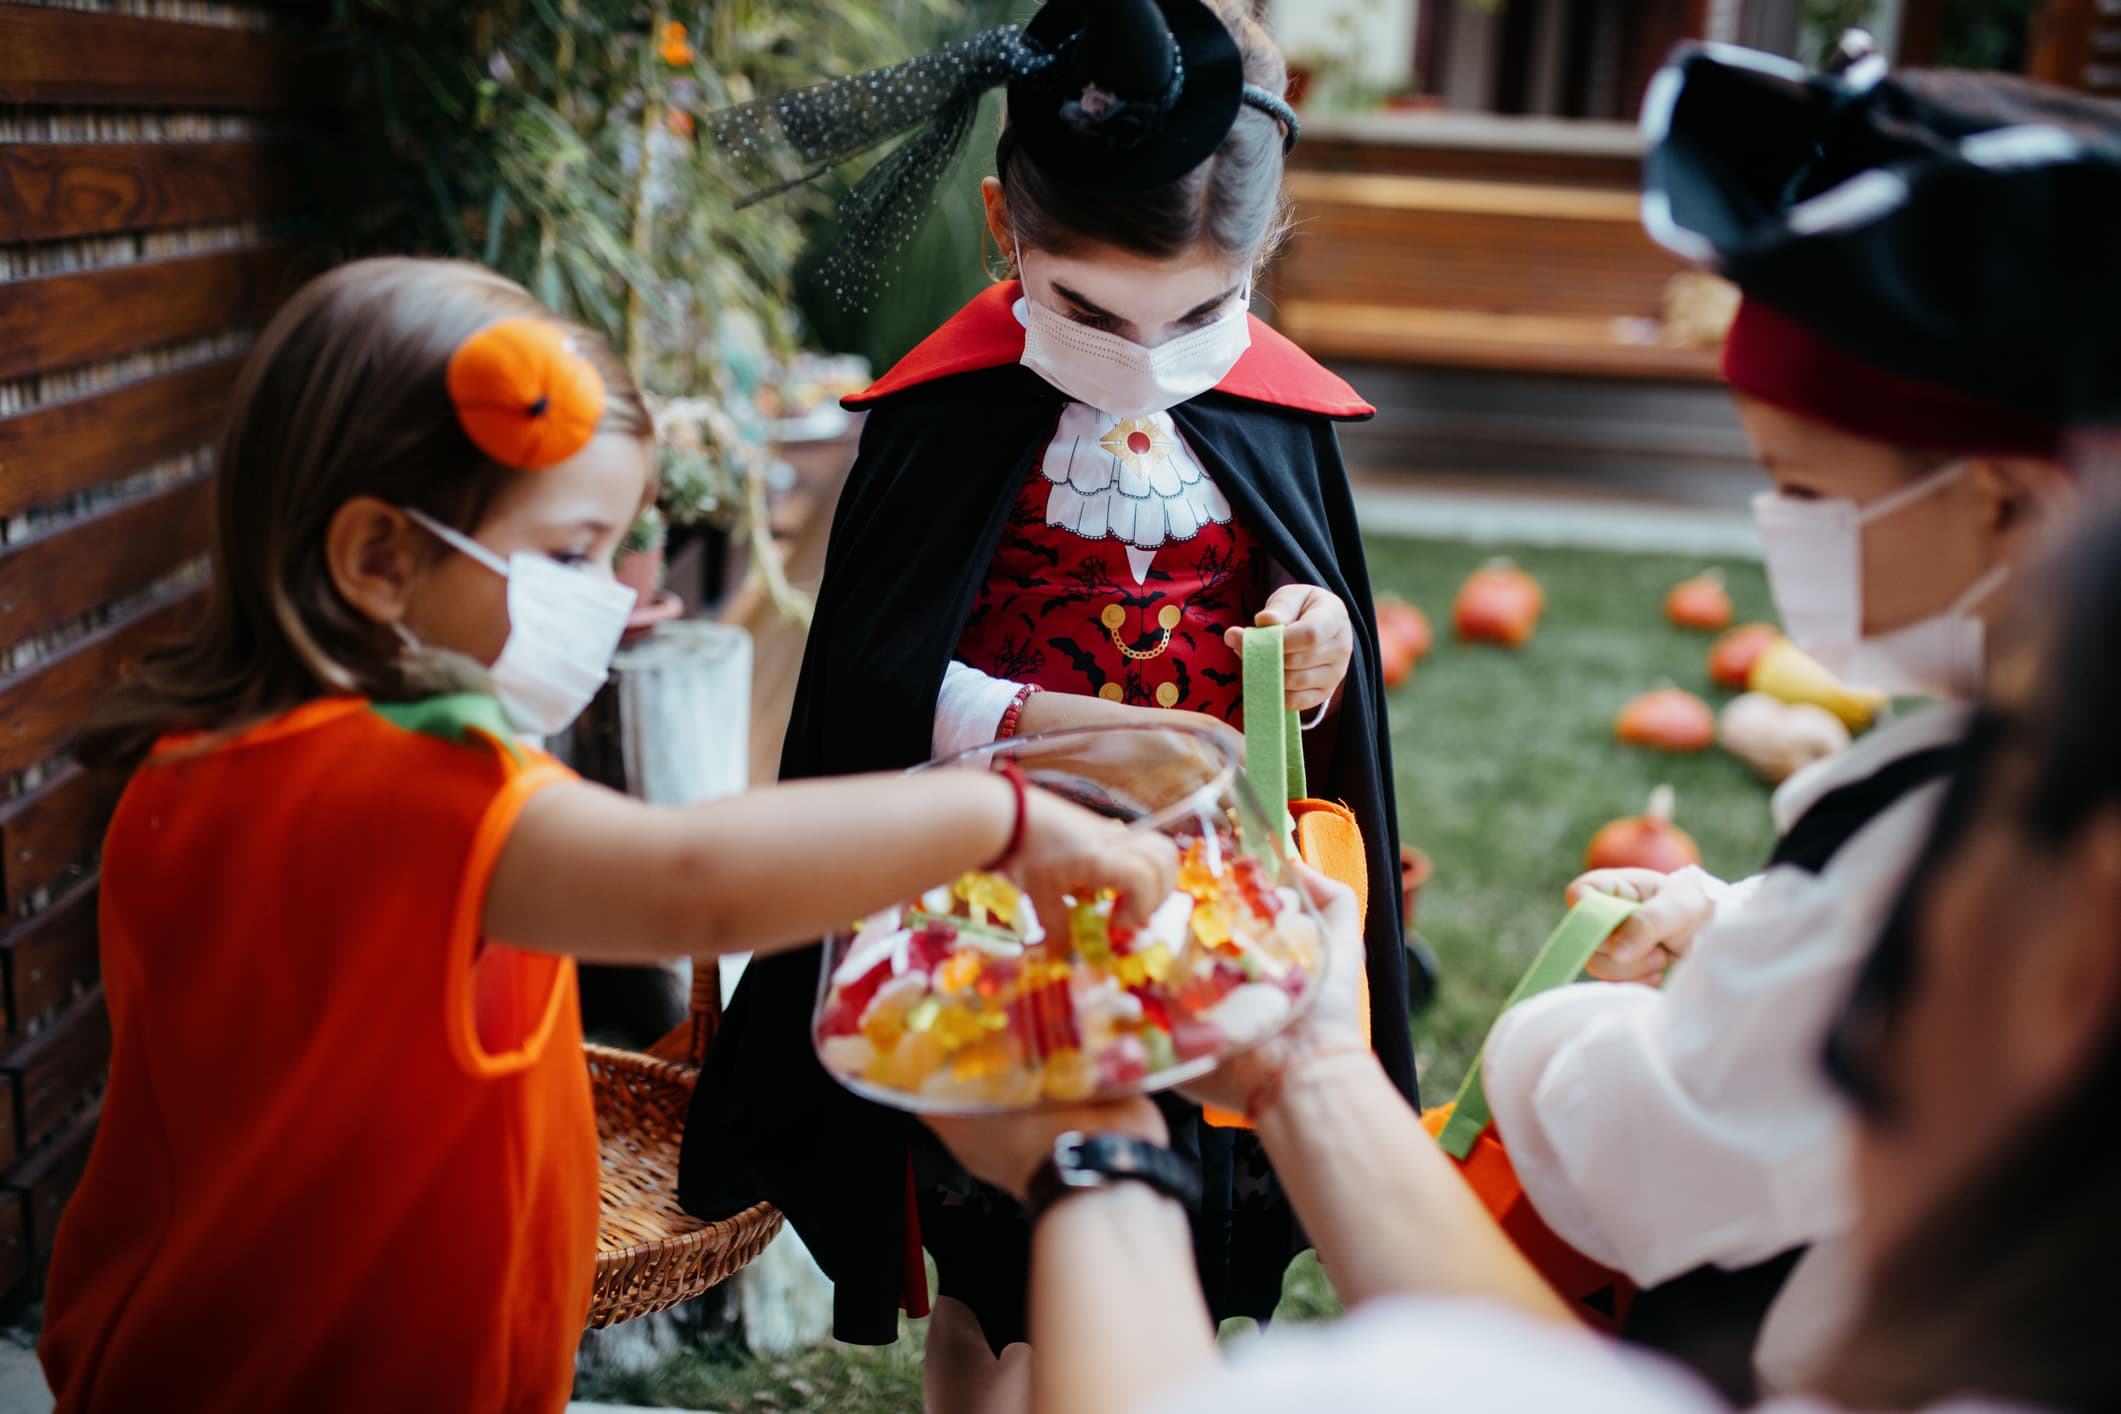 20 medical experts with kids talk about Halloween plans.